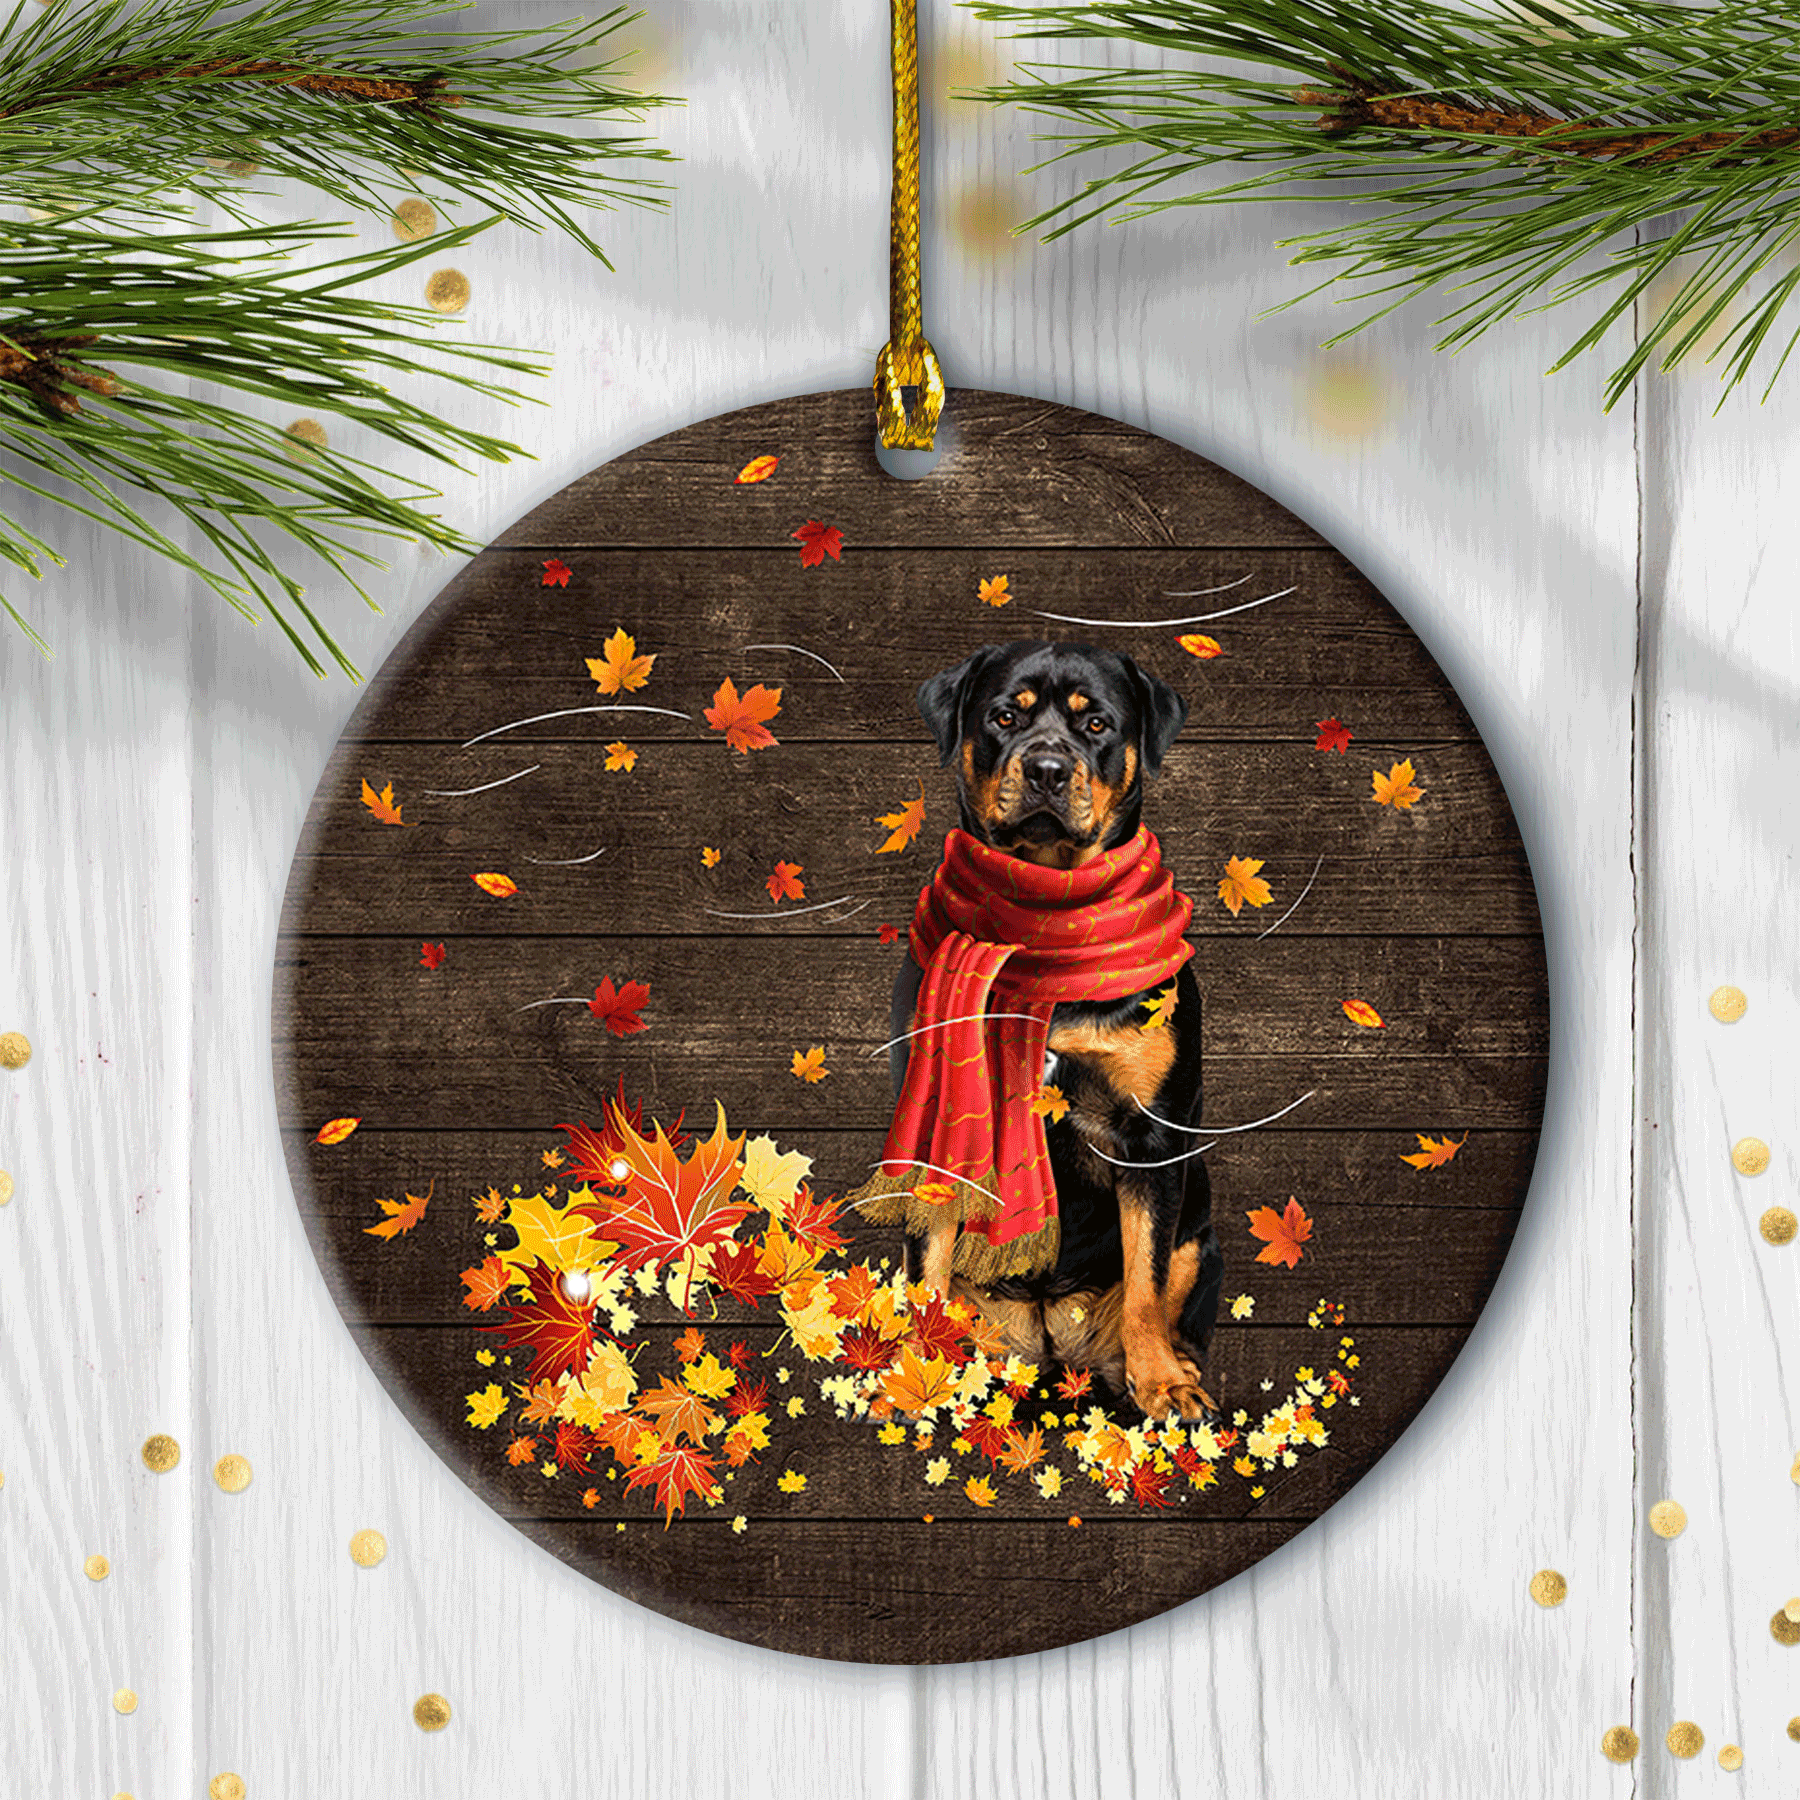 Rottweiler - Ceramic Circle Ornament - Beautiful Autumn - Rottweiler and the red leaves - Christmas Gift for Rottweiler Lover